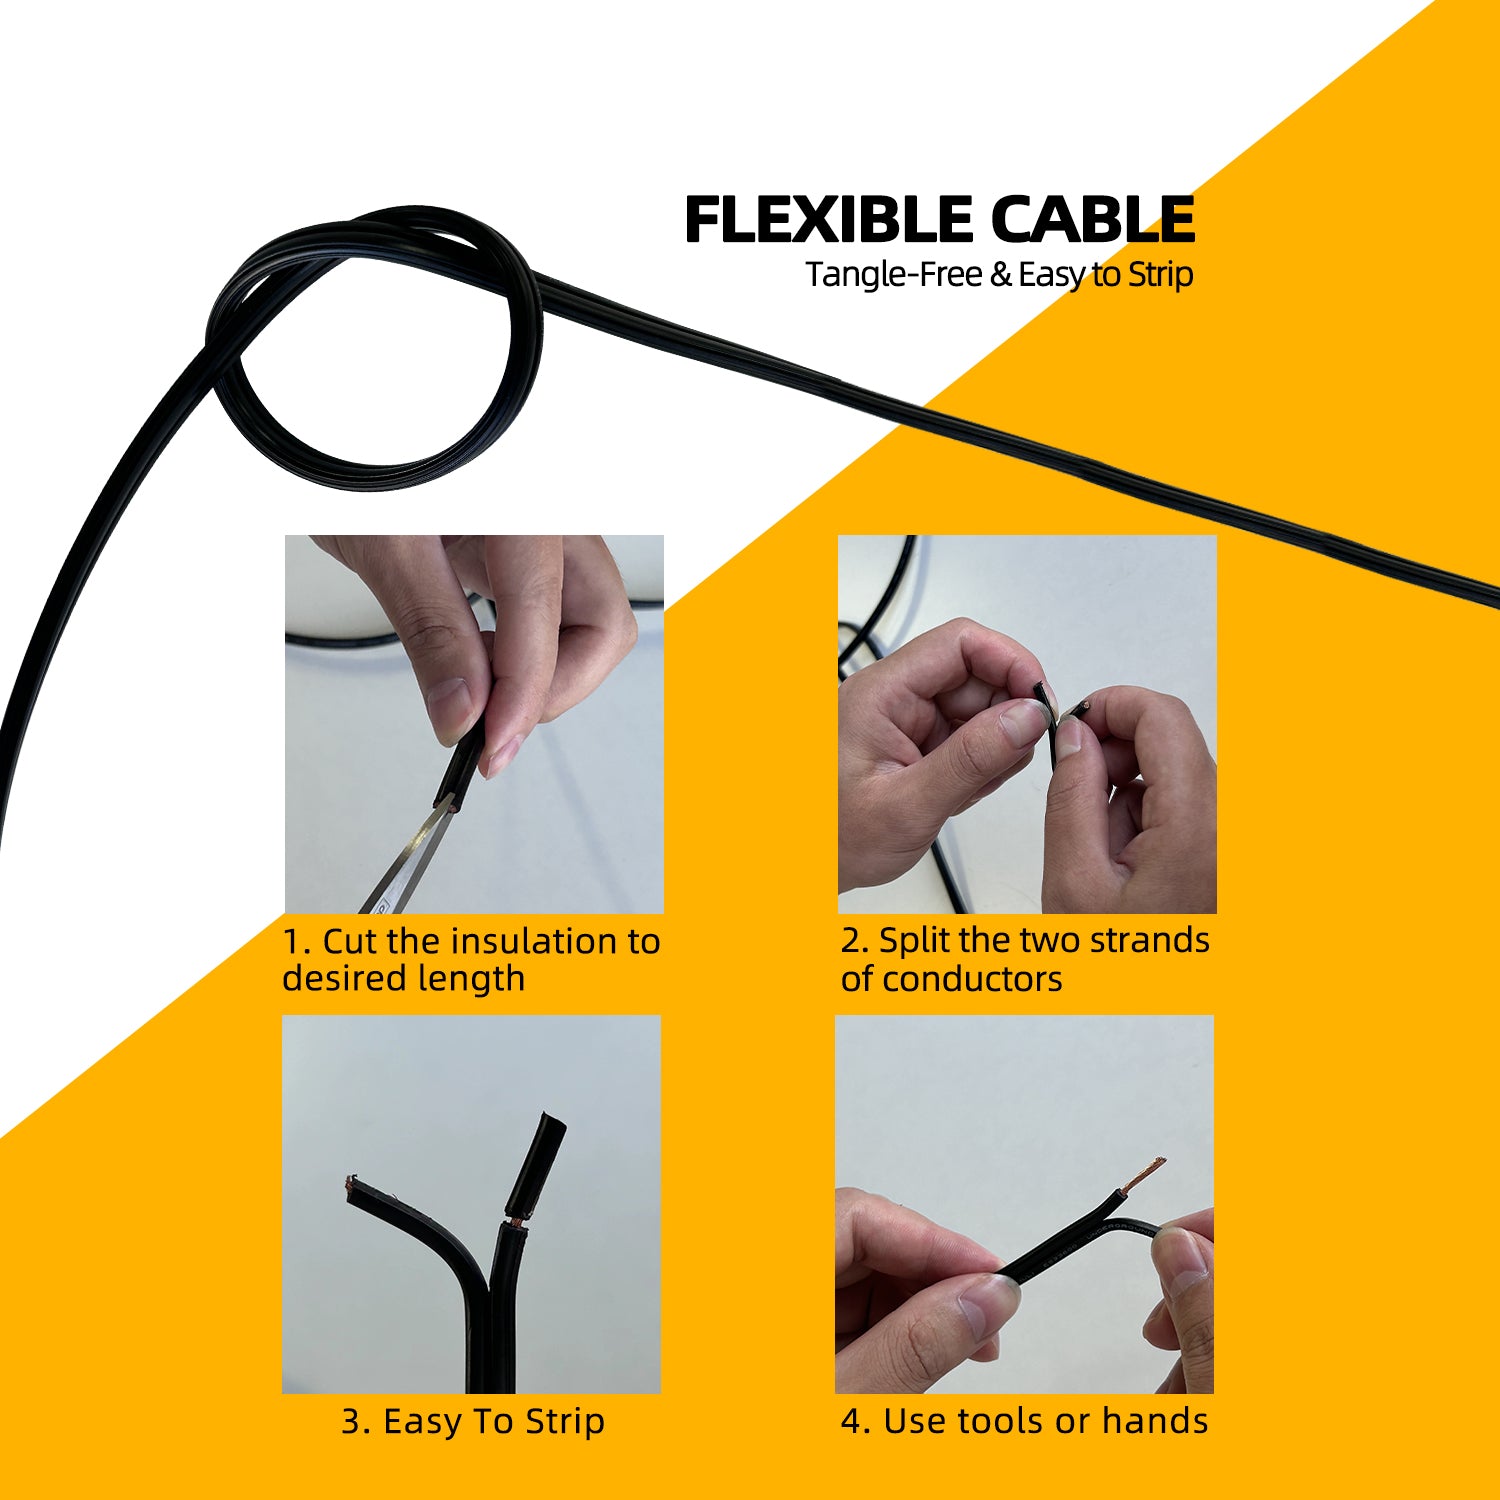 16 gauge low voltage pure copper landscape wire with step-by-step instructions: 1. Cut the insulation to the desired length, 2. Split the two strands of conductors, 3. Easy to strip, and 4. Use tools or hands. Tangle-free and easy to strip flexible cable.